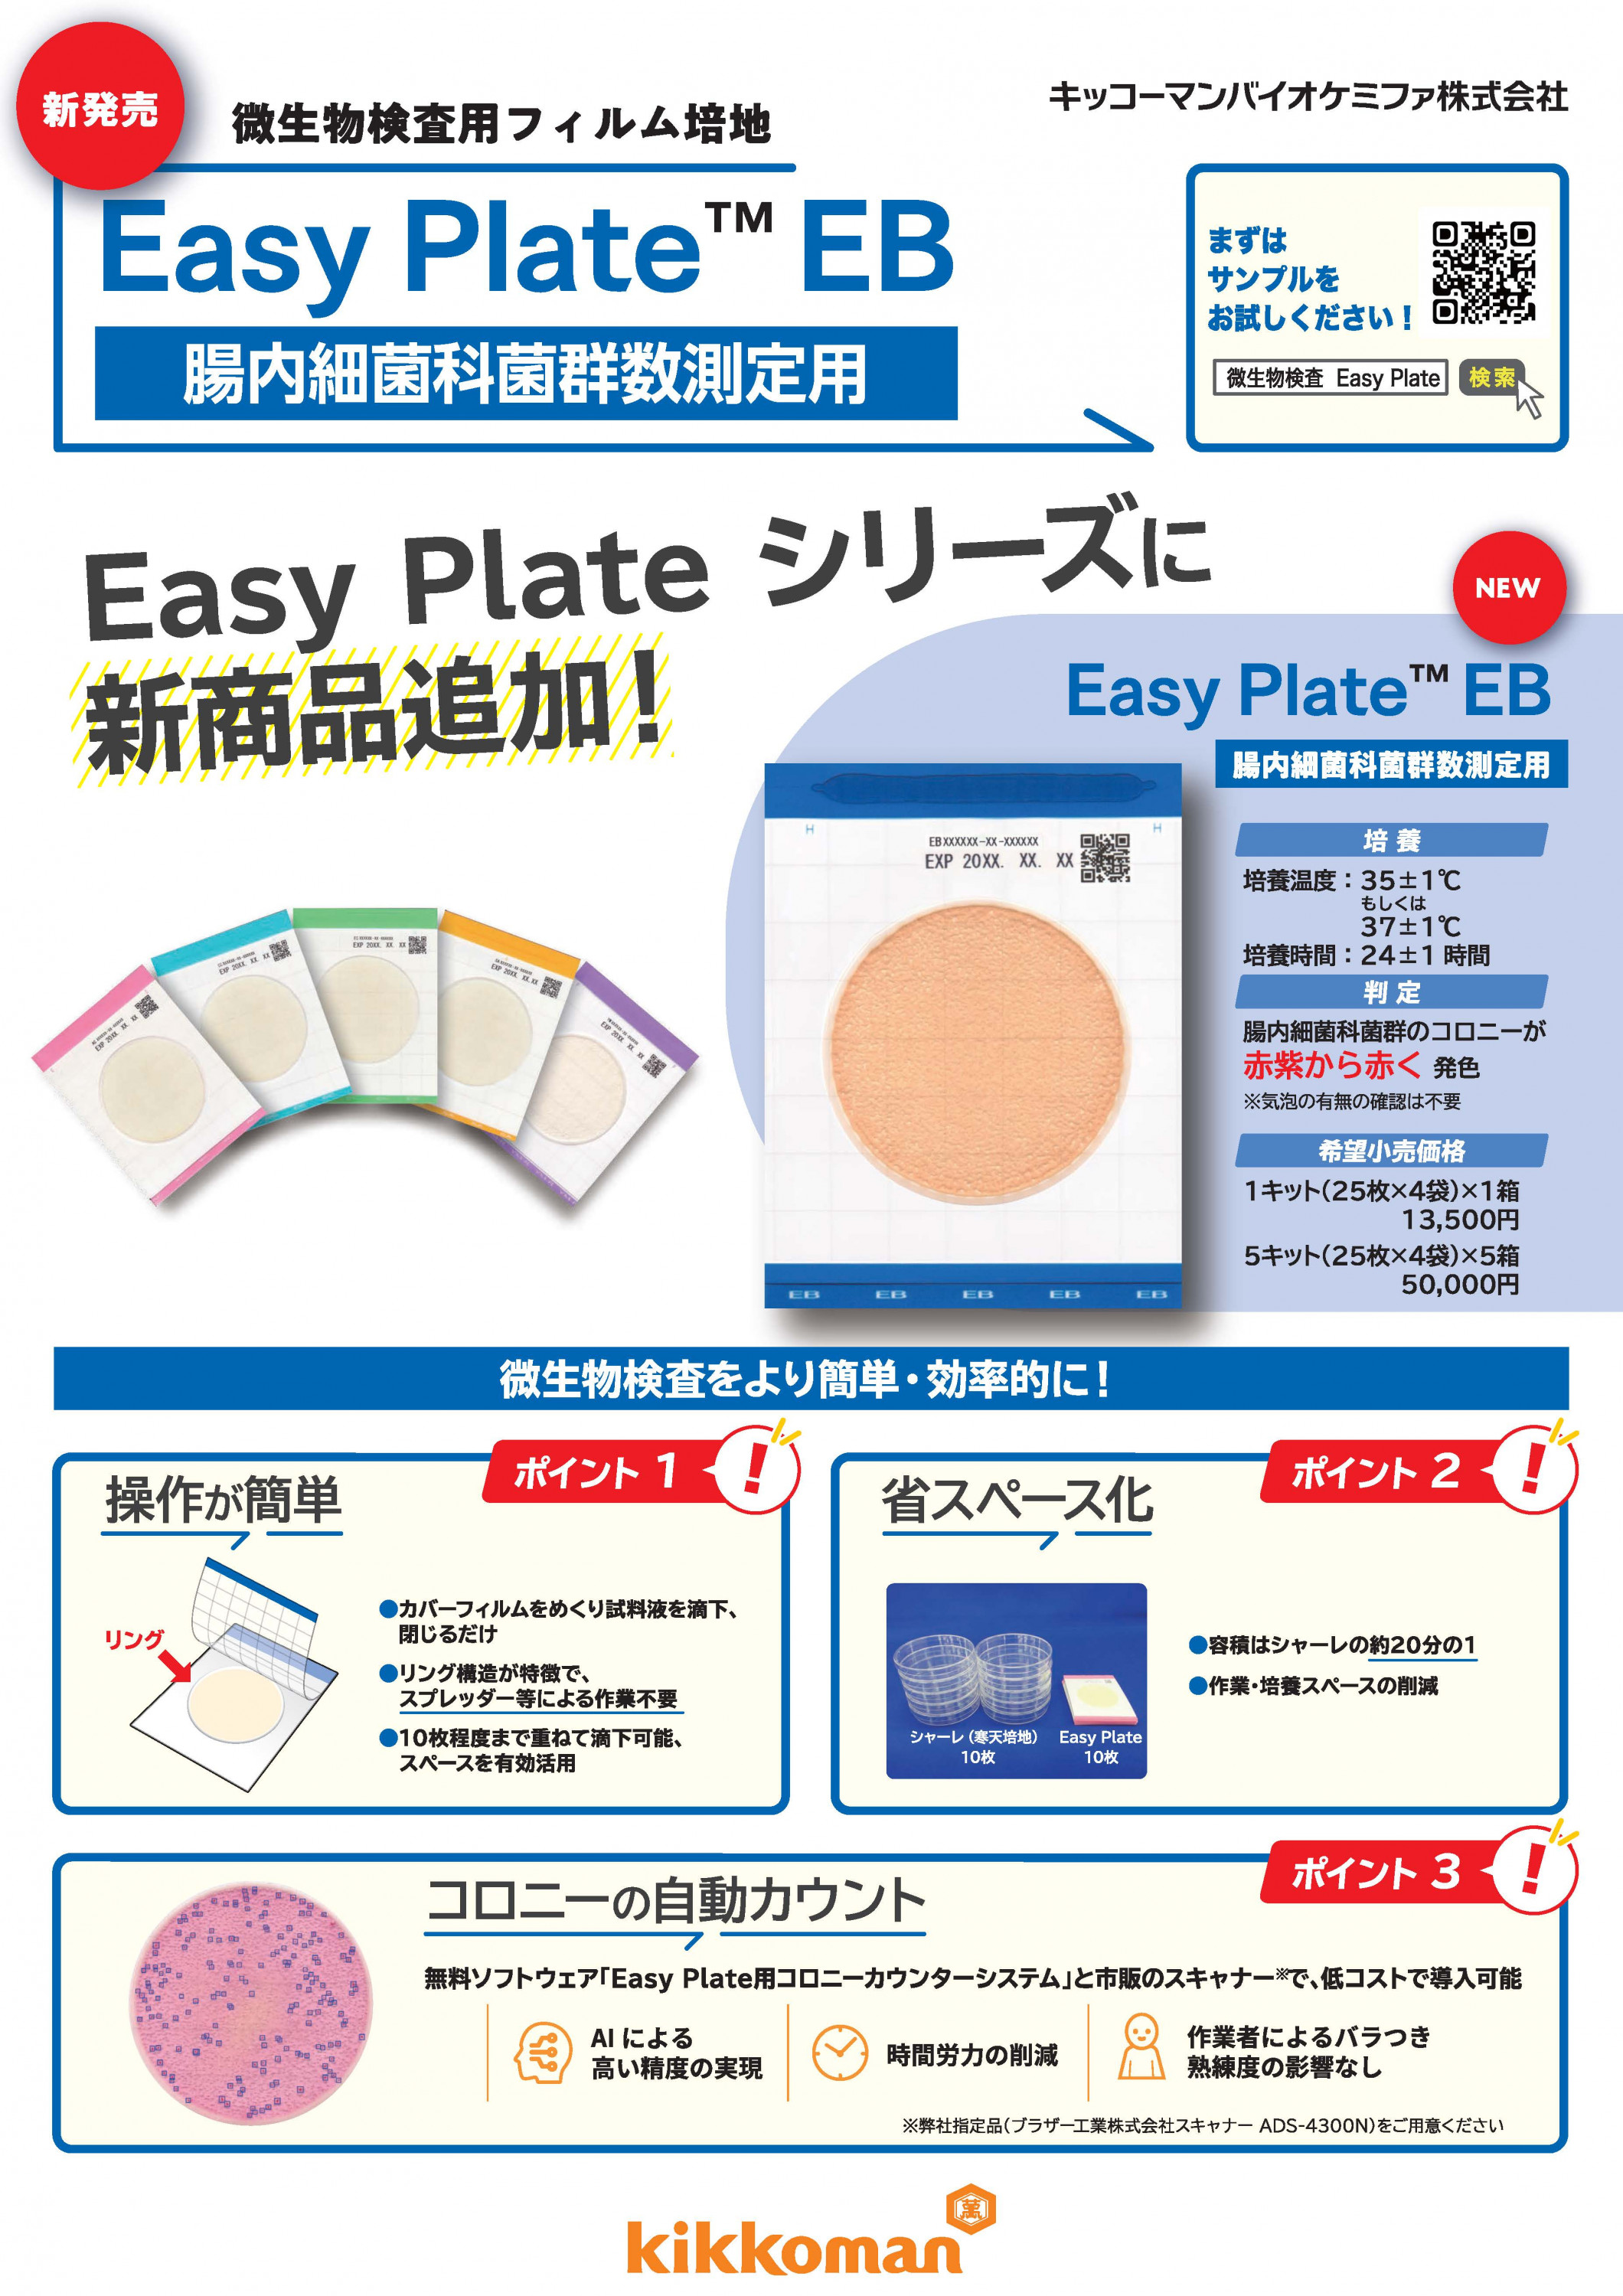 Easy Plate EB